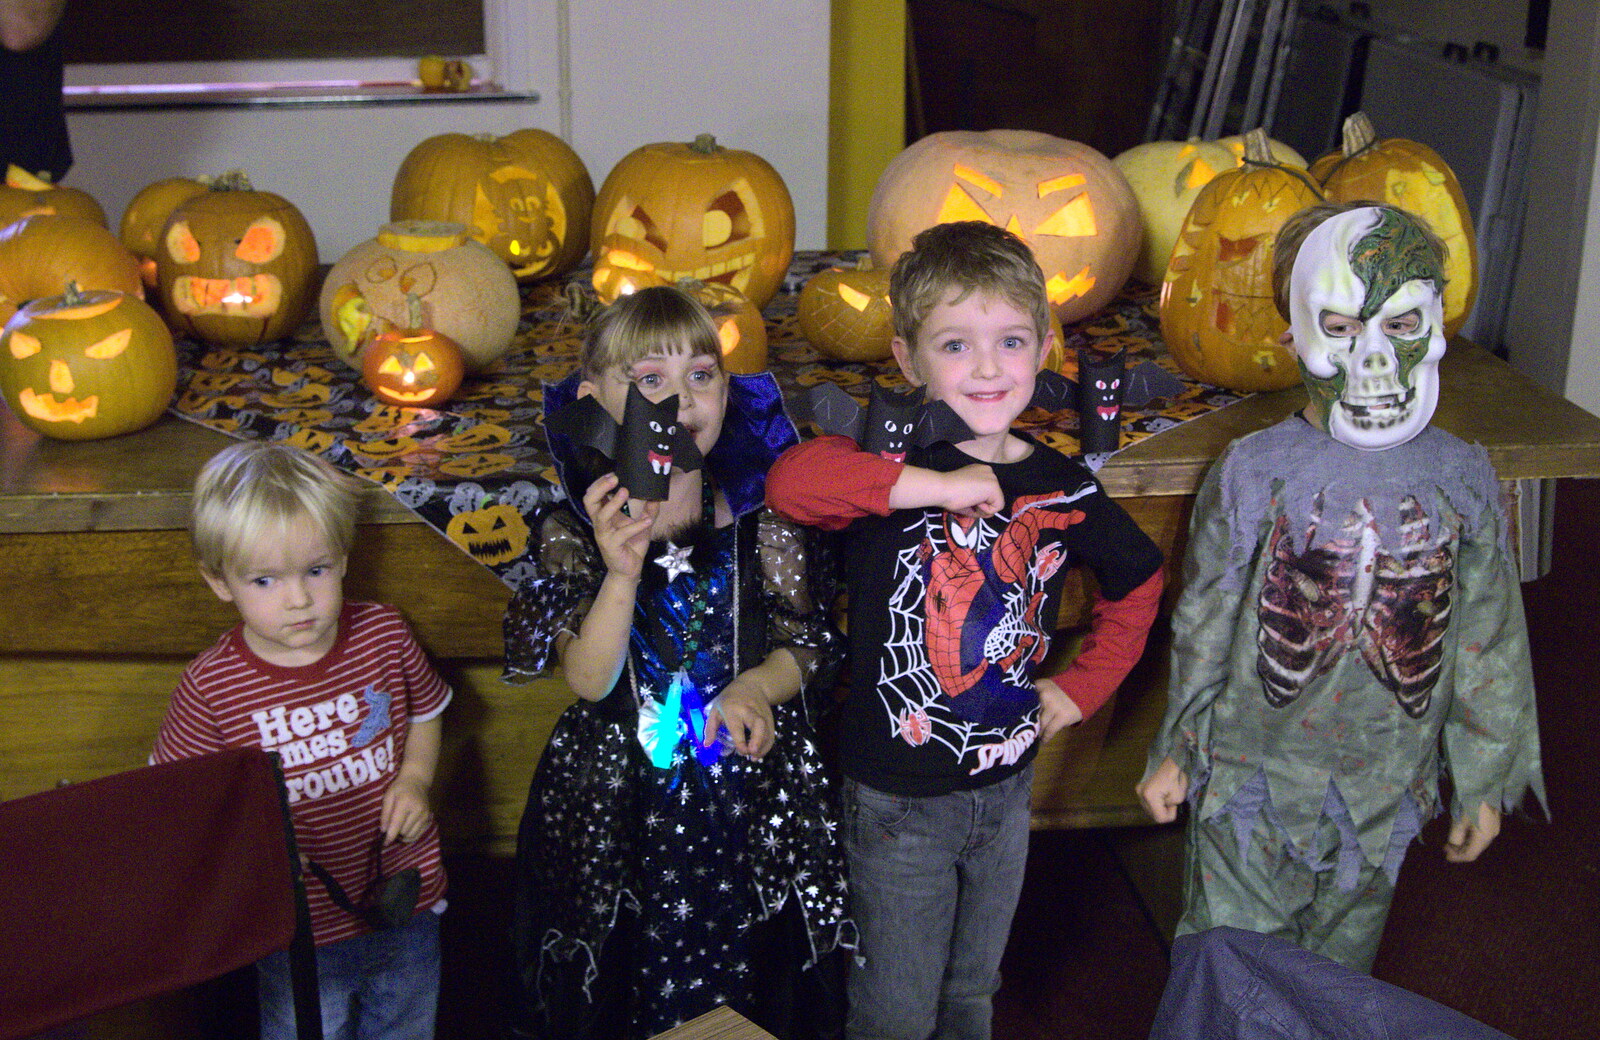 Fred's little gang from A Halloween Party at the Village Hall, Brome, Suffolk - 31st October 2014